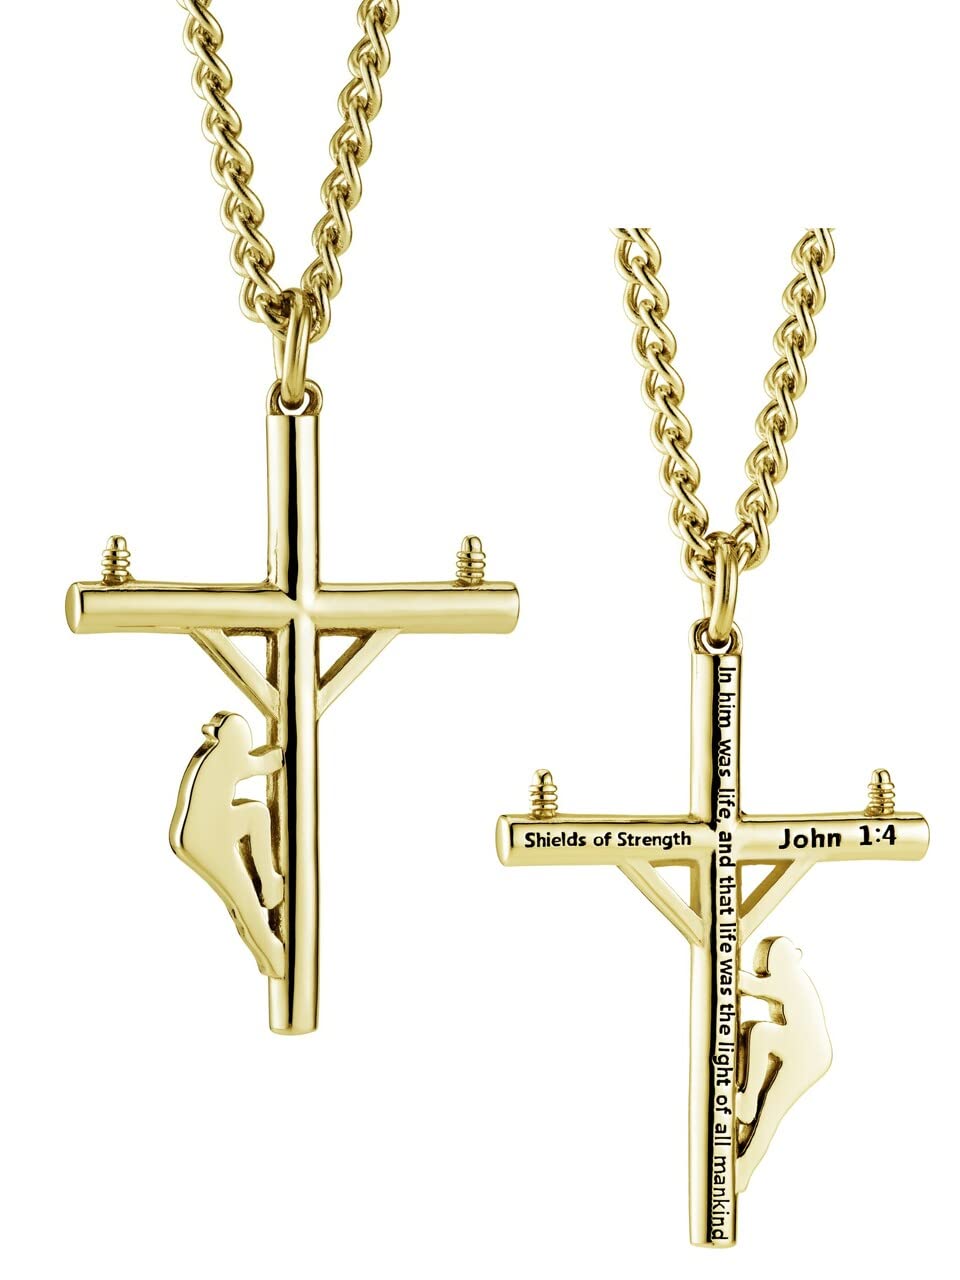 Shields of Strength Men's 14K Gold Plated and Stainless Steel Lineman Cross Pendant Necklace John 1:4 Bible Verse Christian Jewelry Gifts Faith Gift